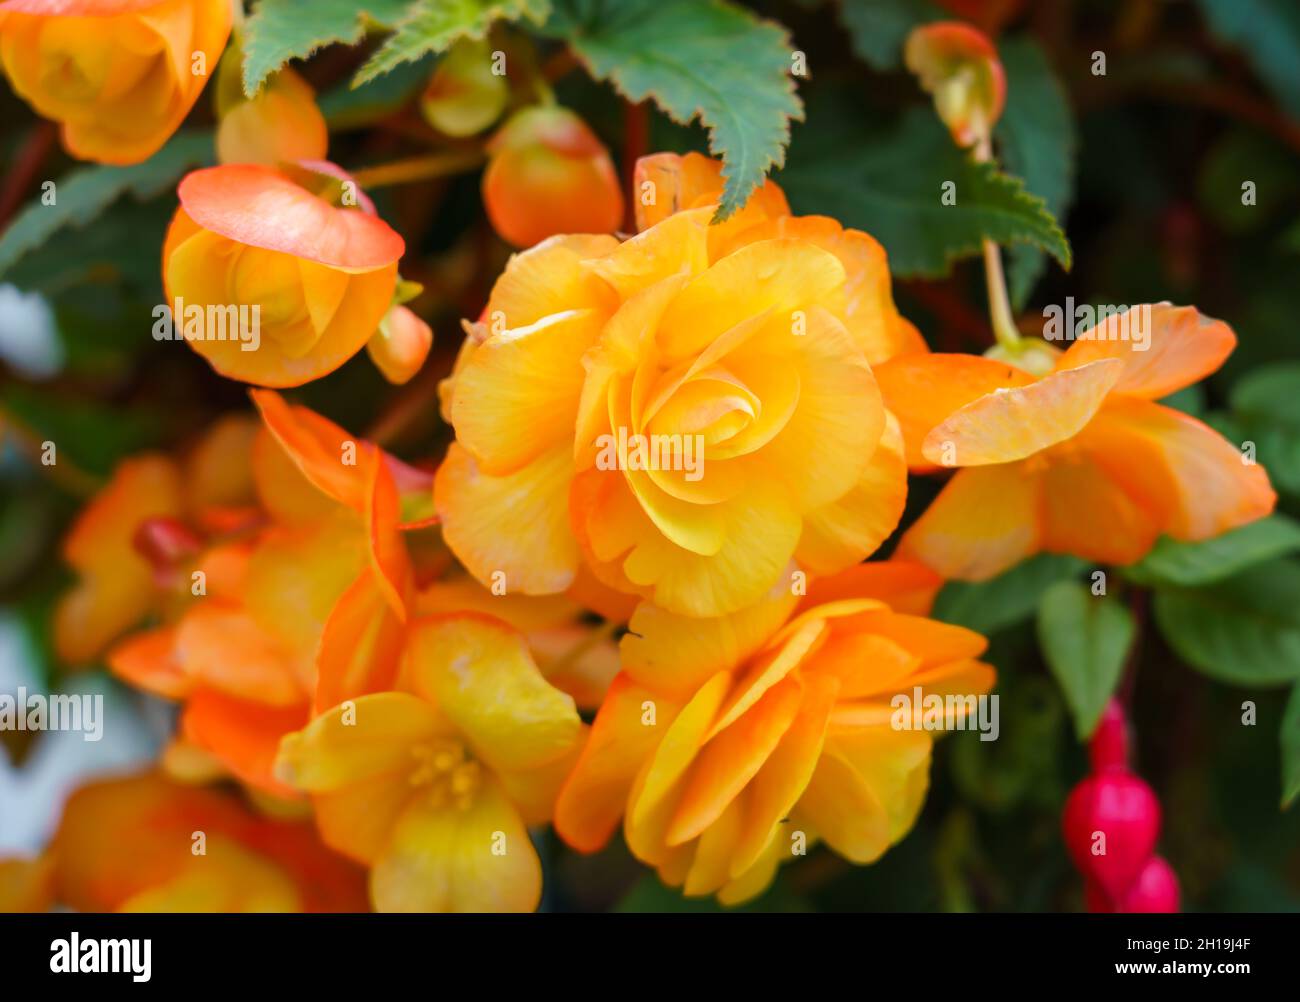 close up of a Begonia Illumination Apricot Shades x tuberhybrida flower in late autumn bloom Stock Photo